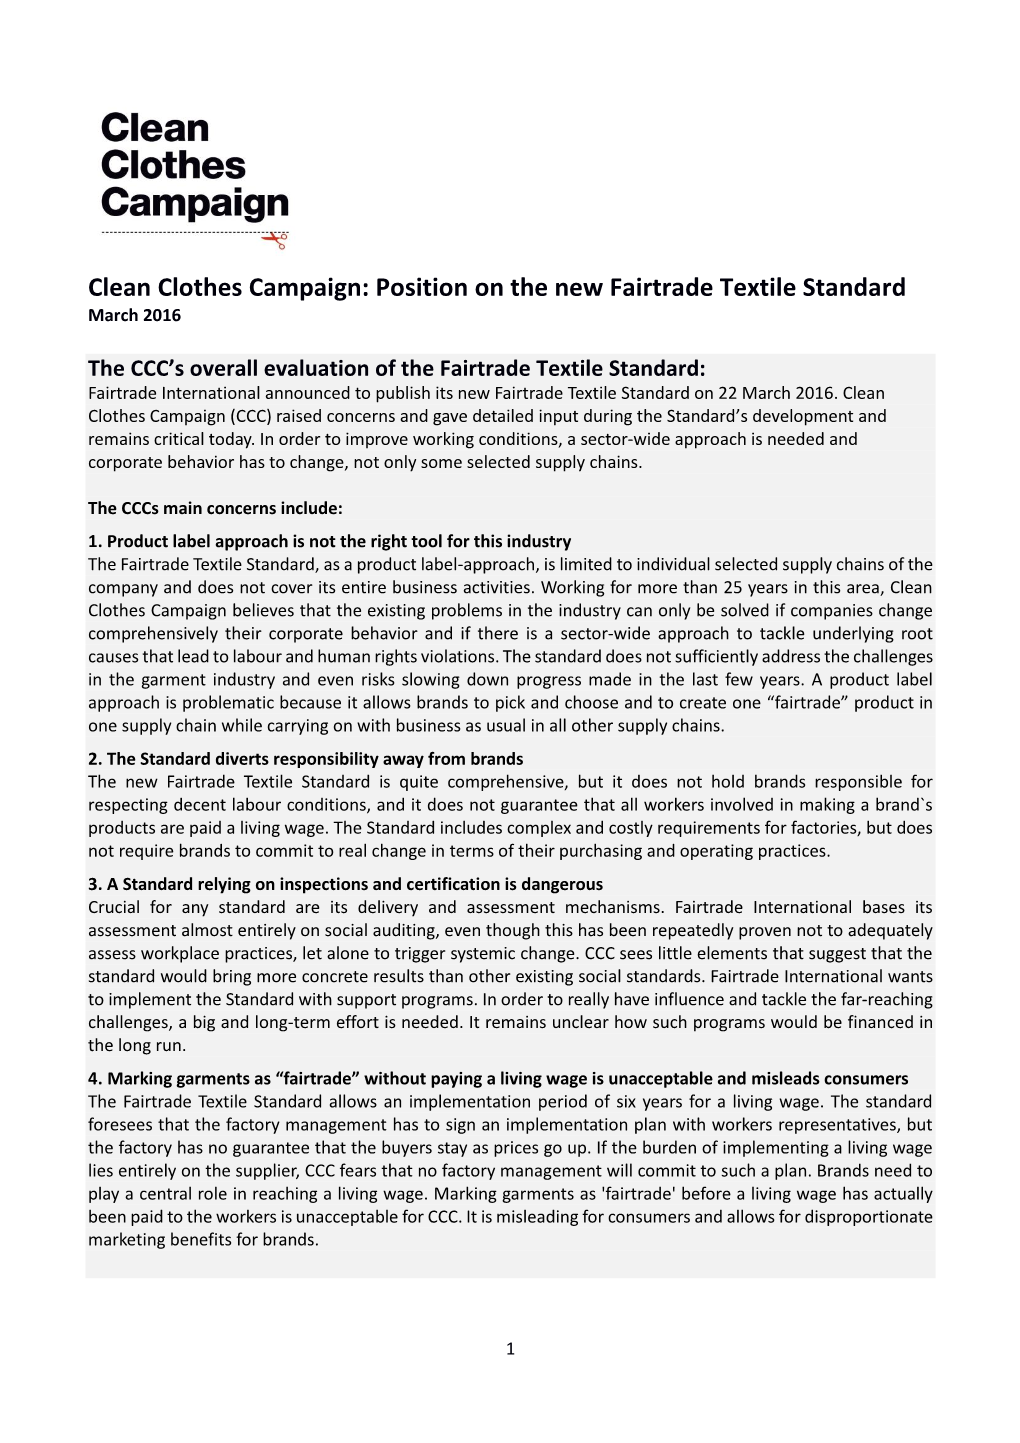 Position on the New Fairtrade Textile Standard March 2016